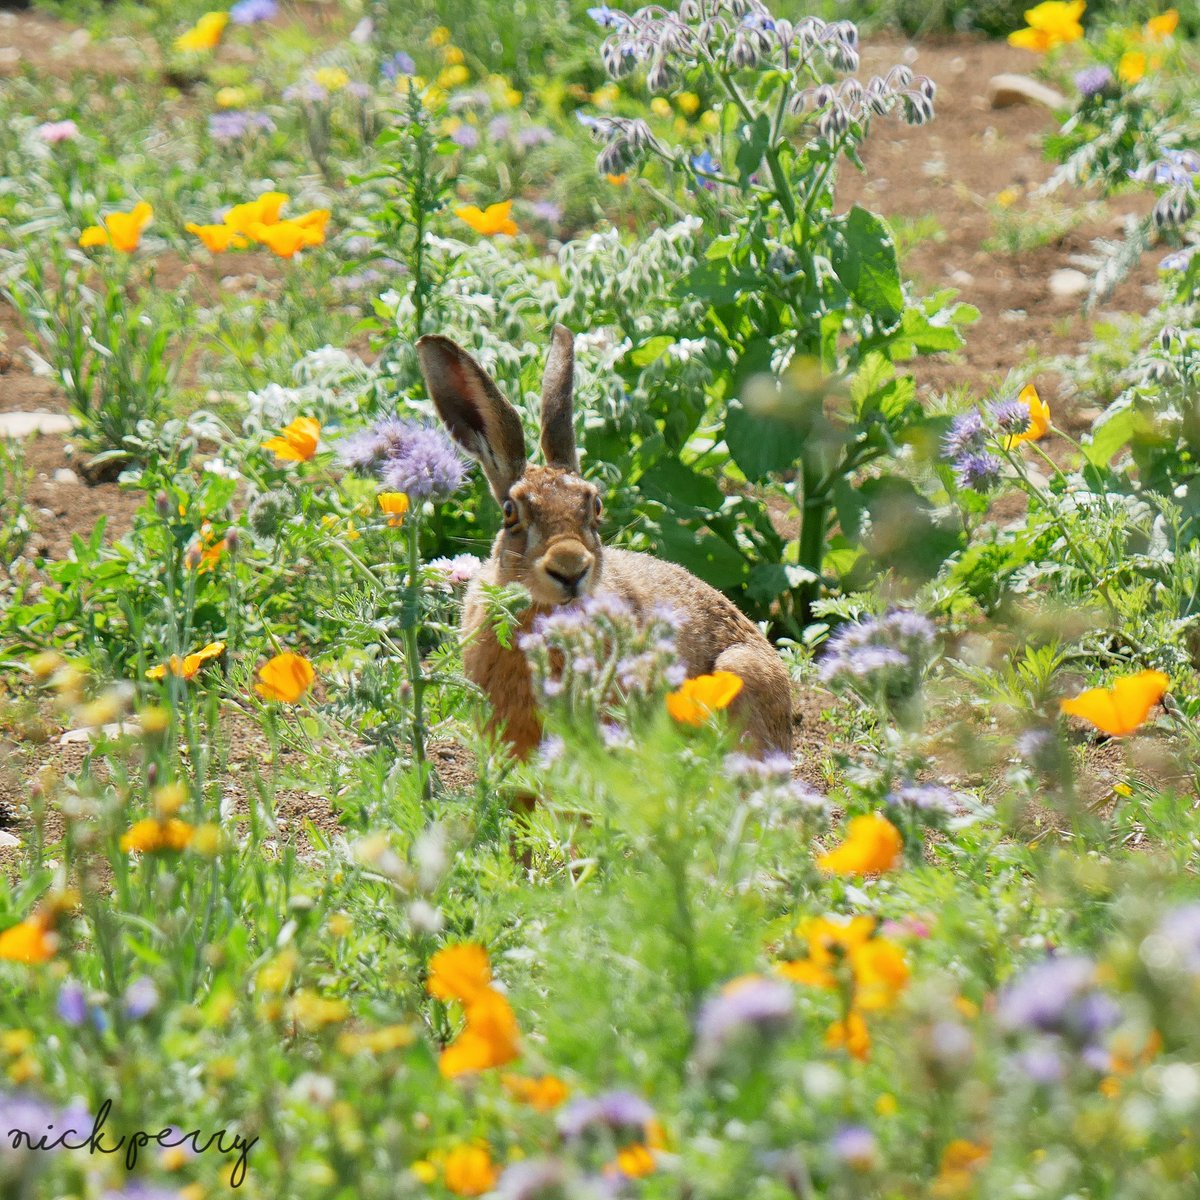 Almost forgot about #MammalMonday here's a brown hare in a flower field🏴󠁧󠁢󠁷󠁬󠁳󠁿